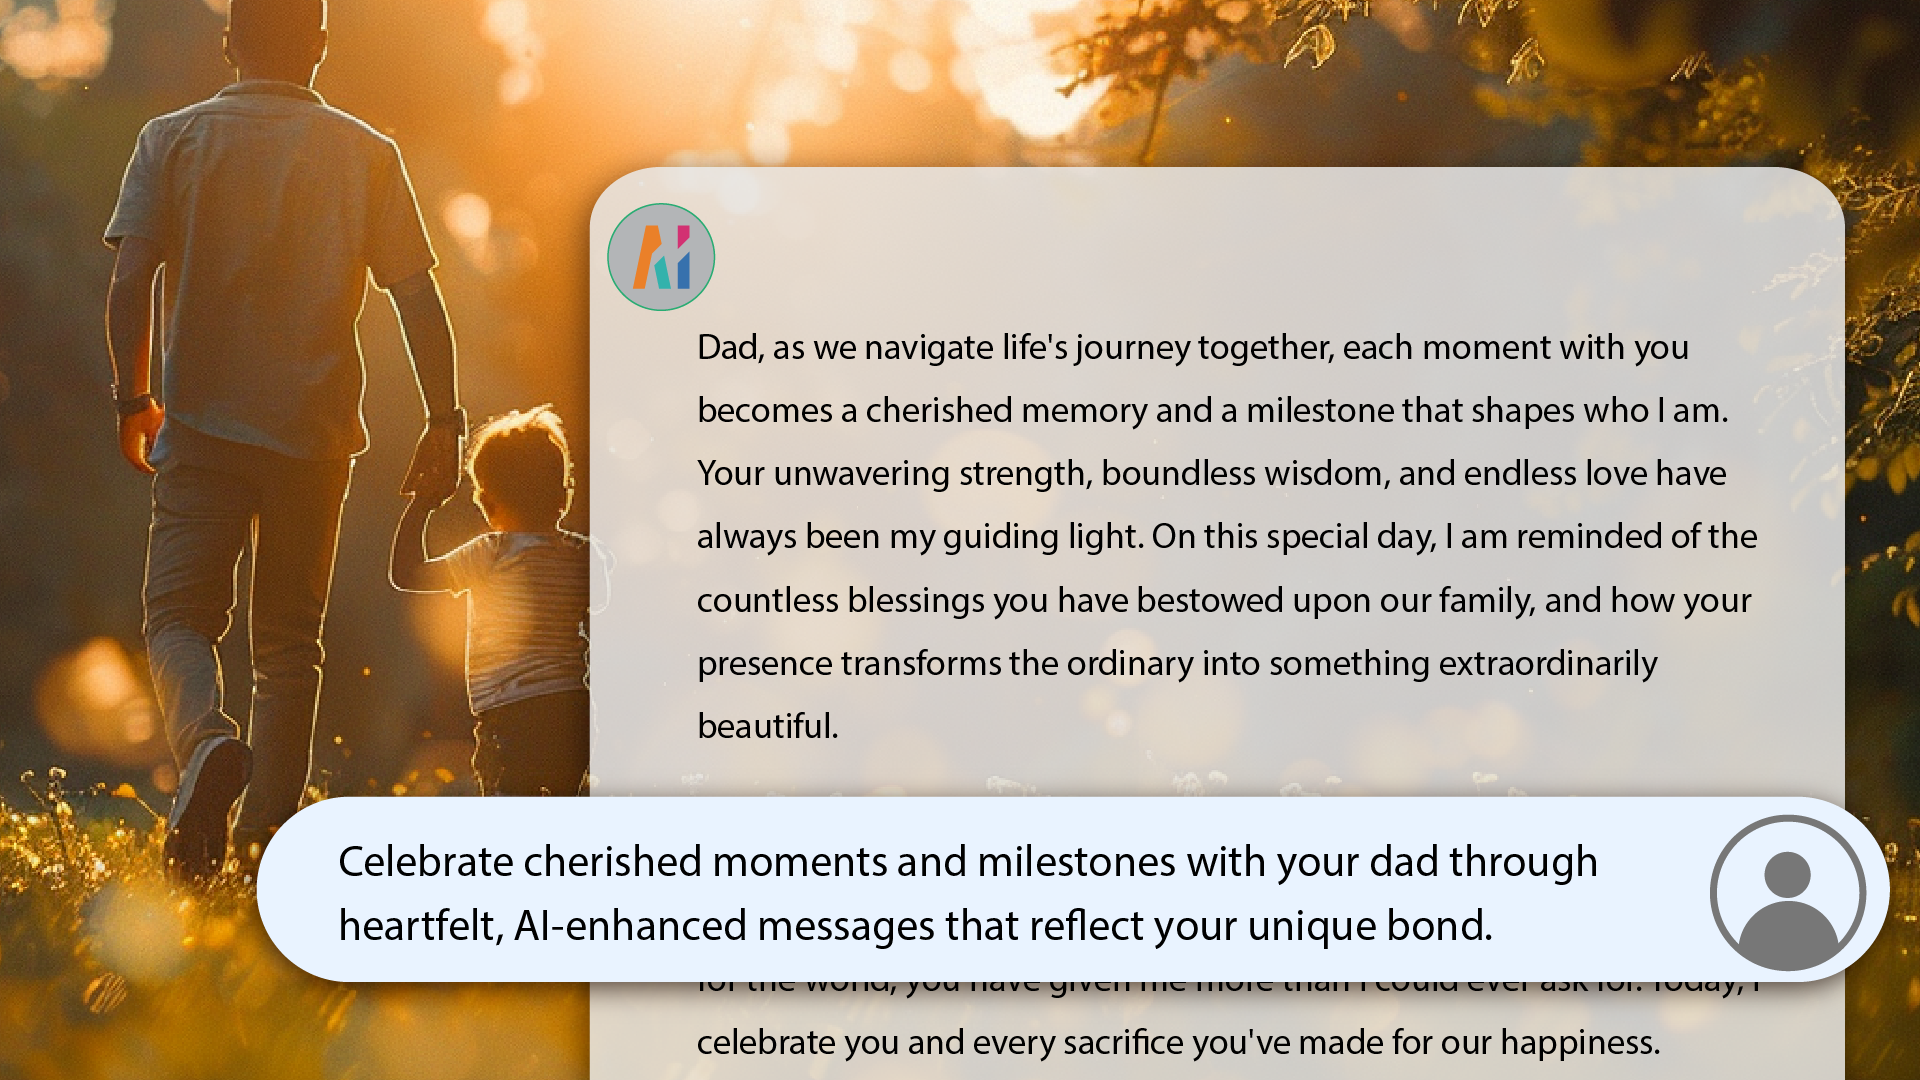 Digital love: Heartfelt Father's Day posts made easy with AI_1